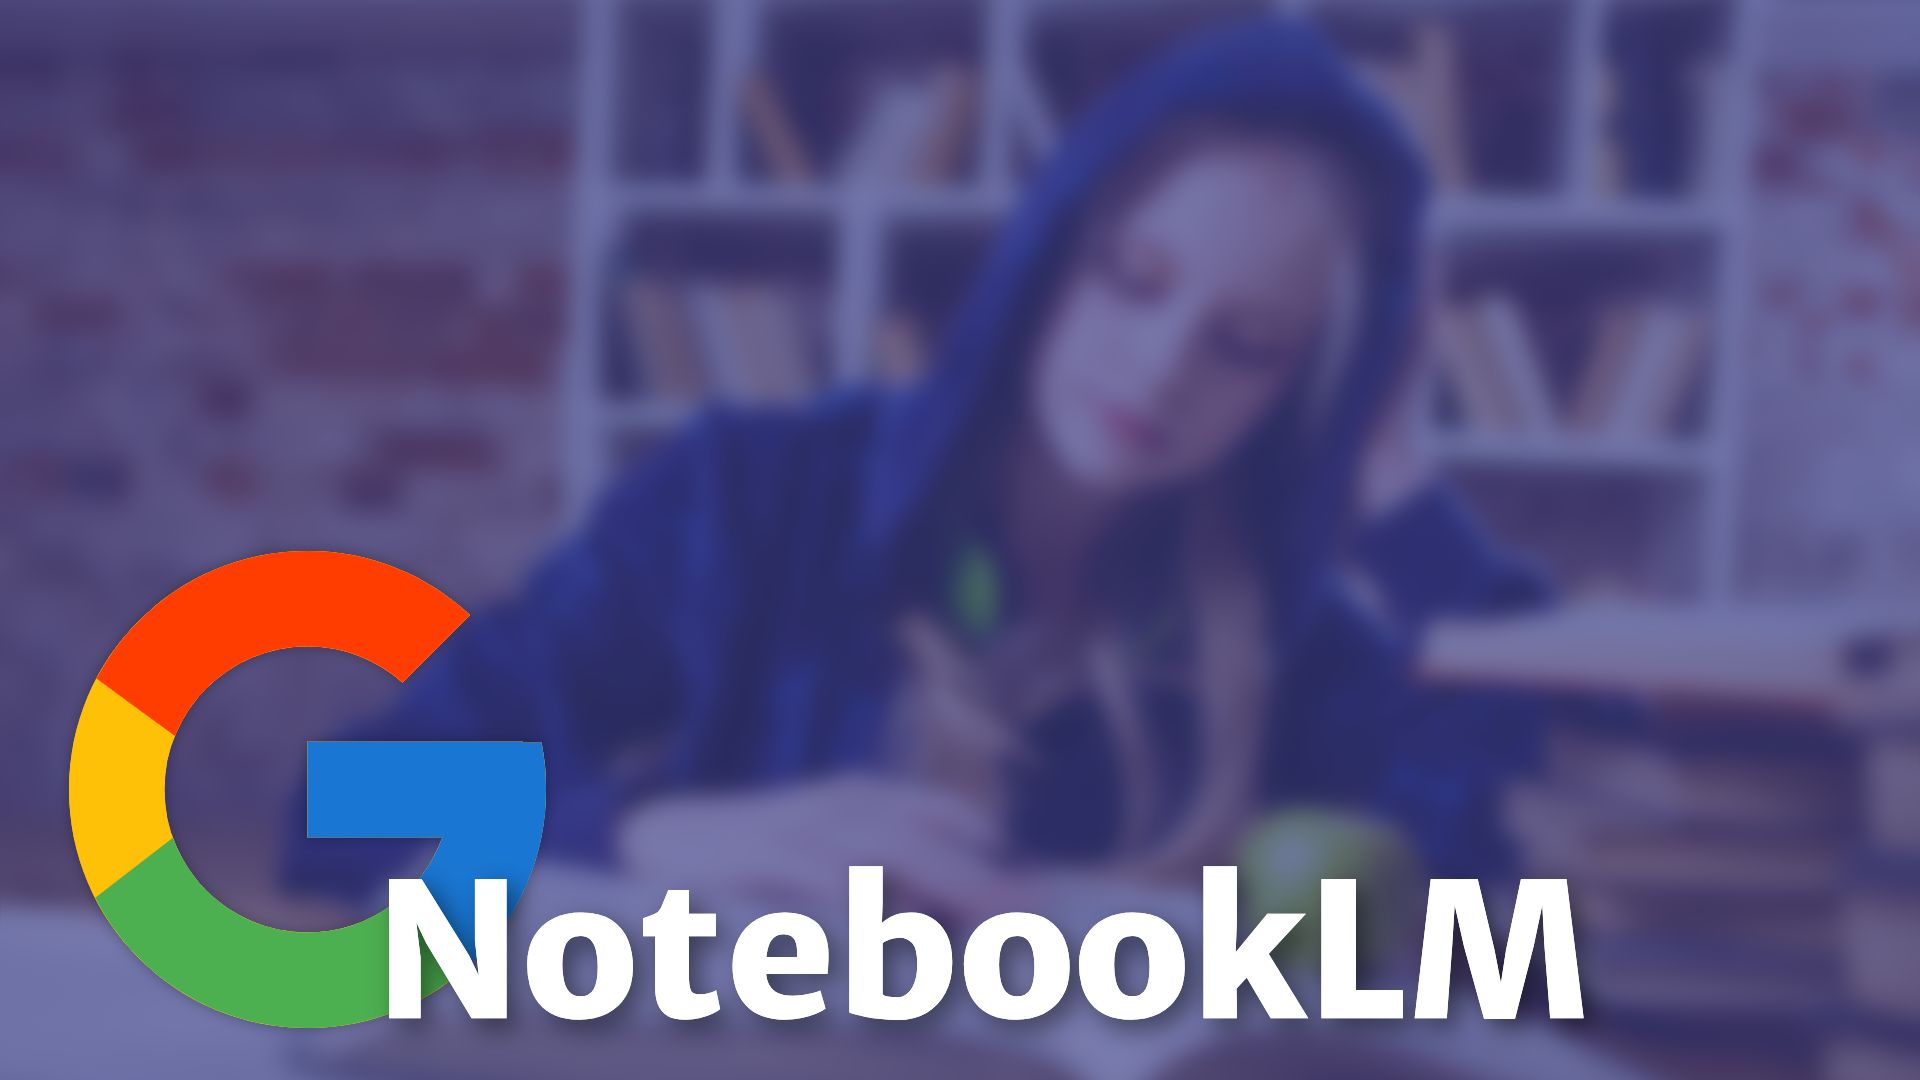 googles-ai-assisted-notebooklm-note-taking-app-now-available-to-us-users